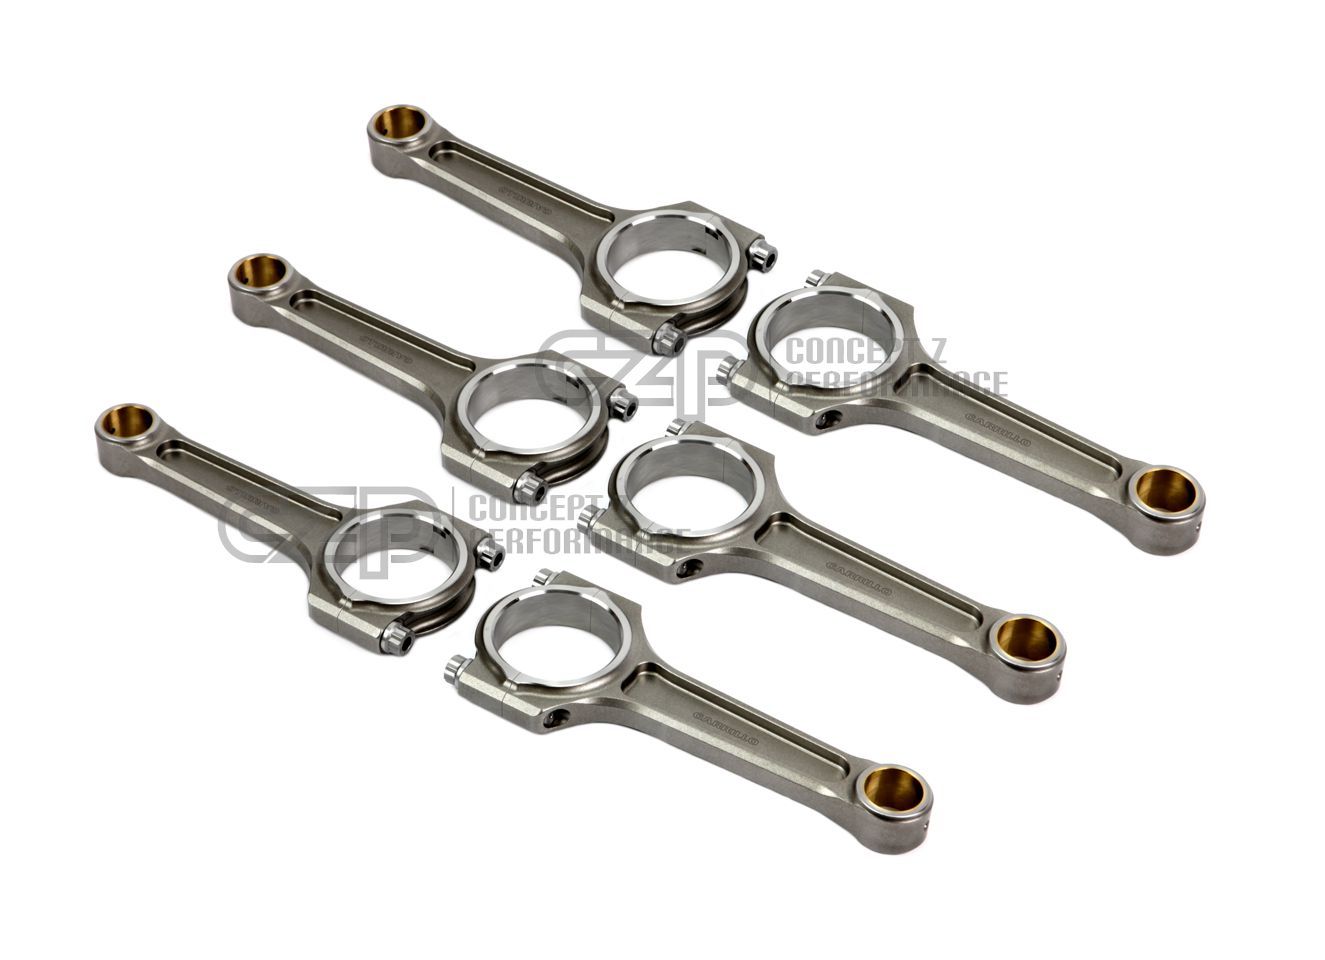 Carrillo Pro H-Beam S Connecting Rods, VQ35 - Nissan 350Z / Infiniti G35